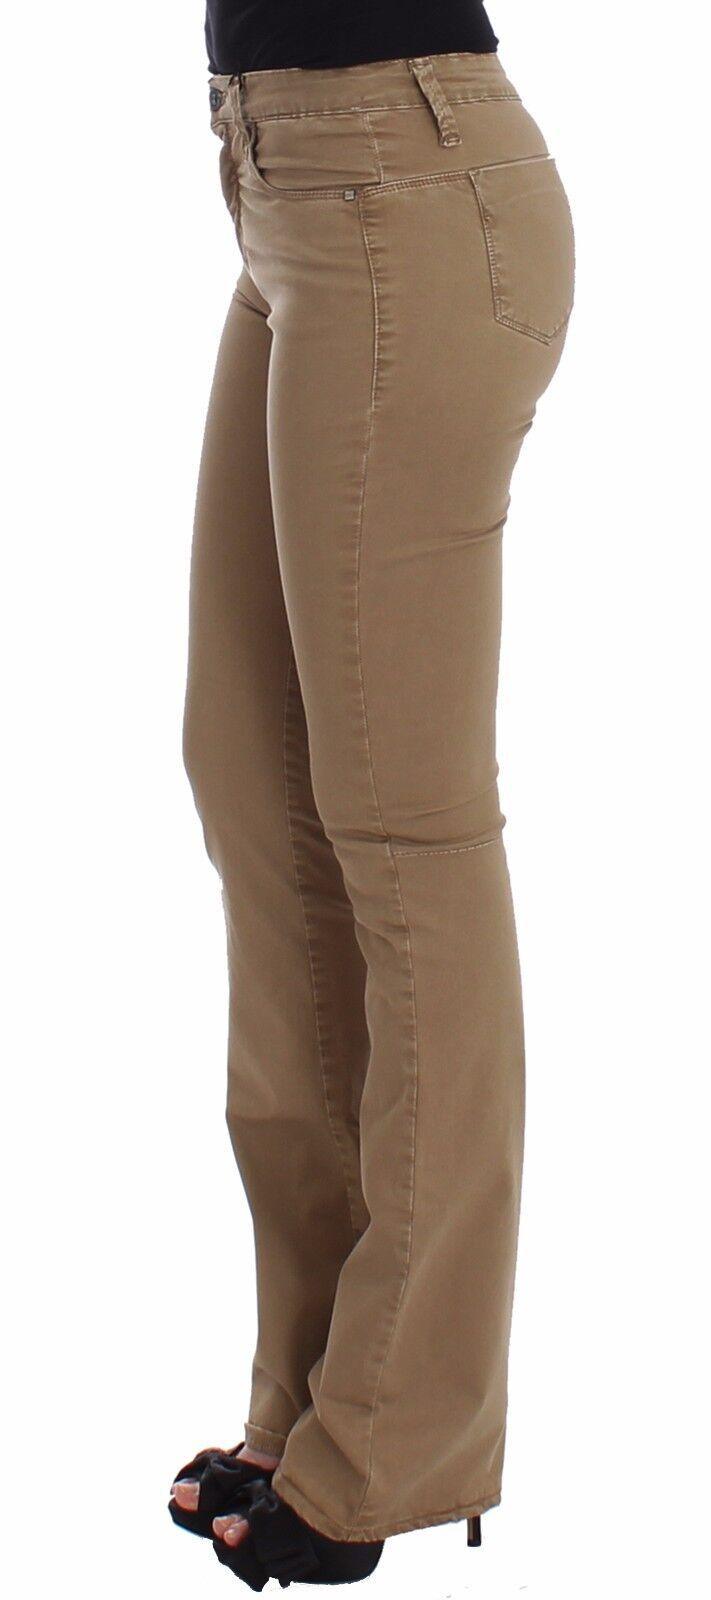 Costume National Beige Straight Leg Denim Pants Stretch Jeans - Designed by Costume National Available to Buy at a Discounted Price on Moon Behind The Hill Online Designer Discount Store